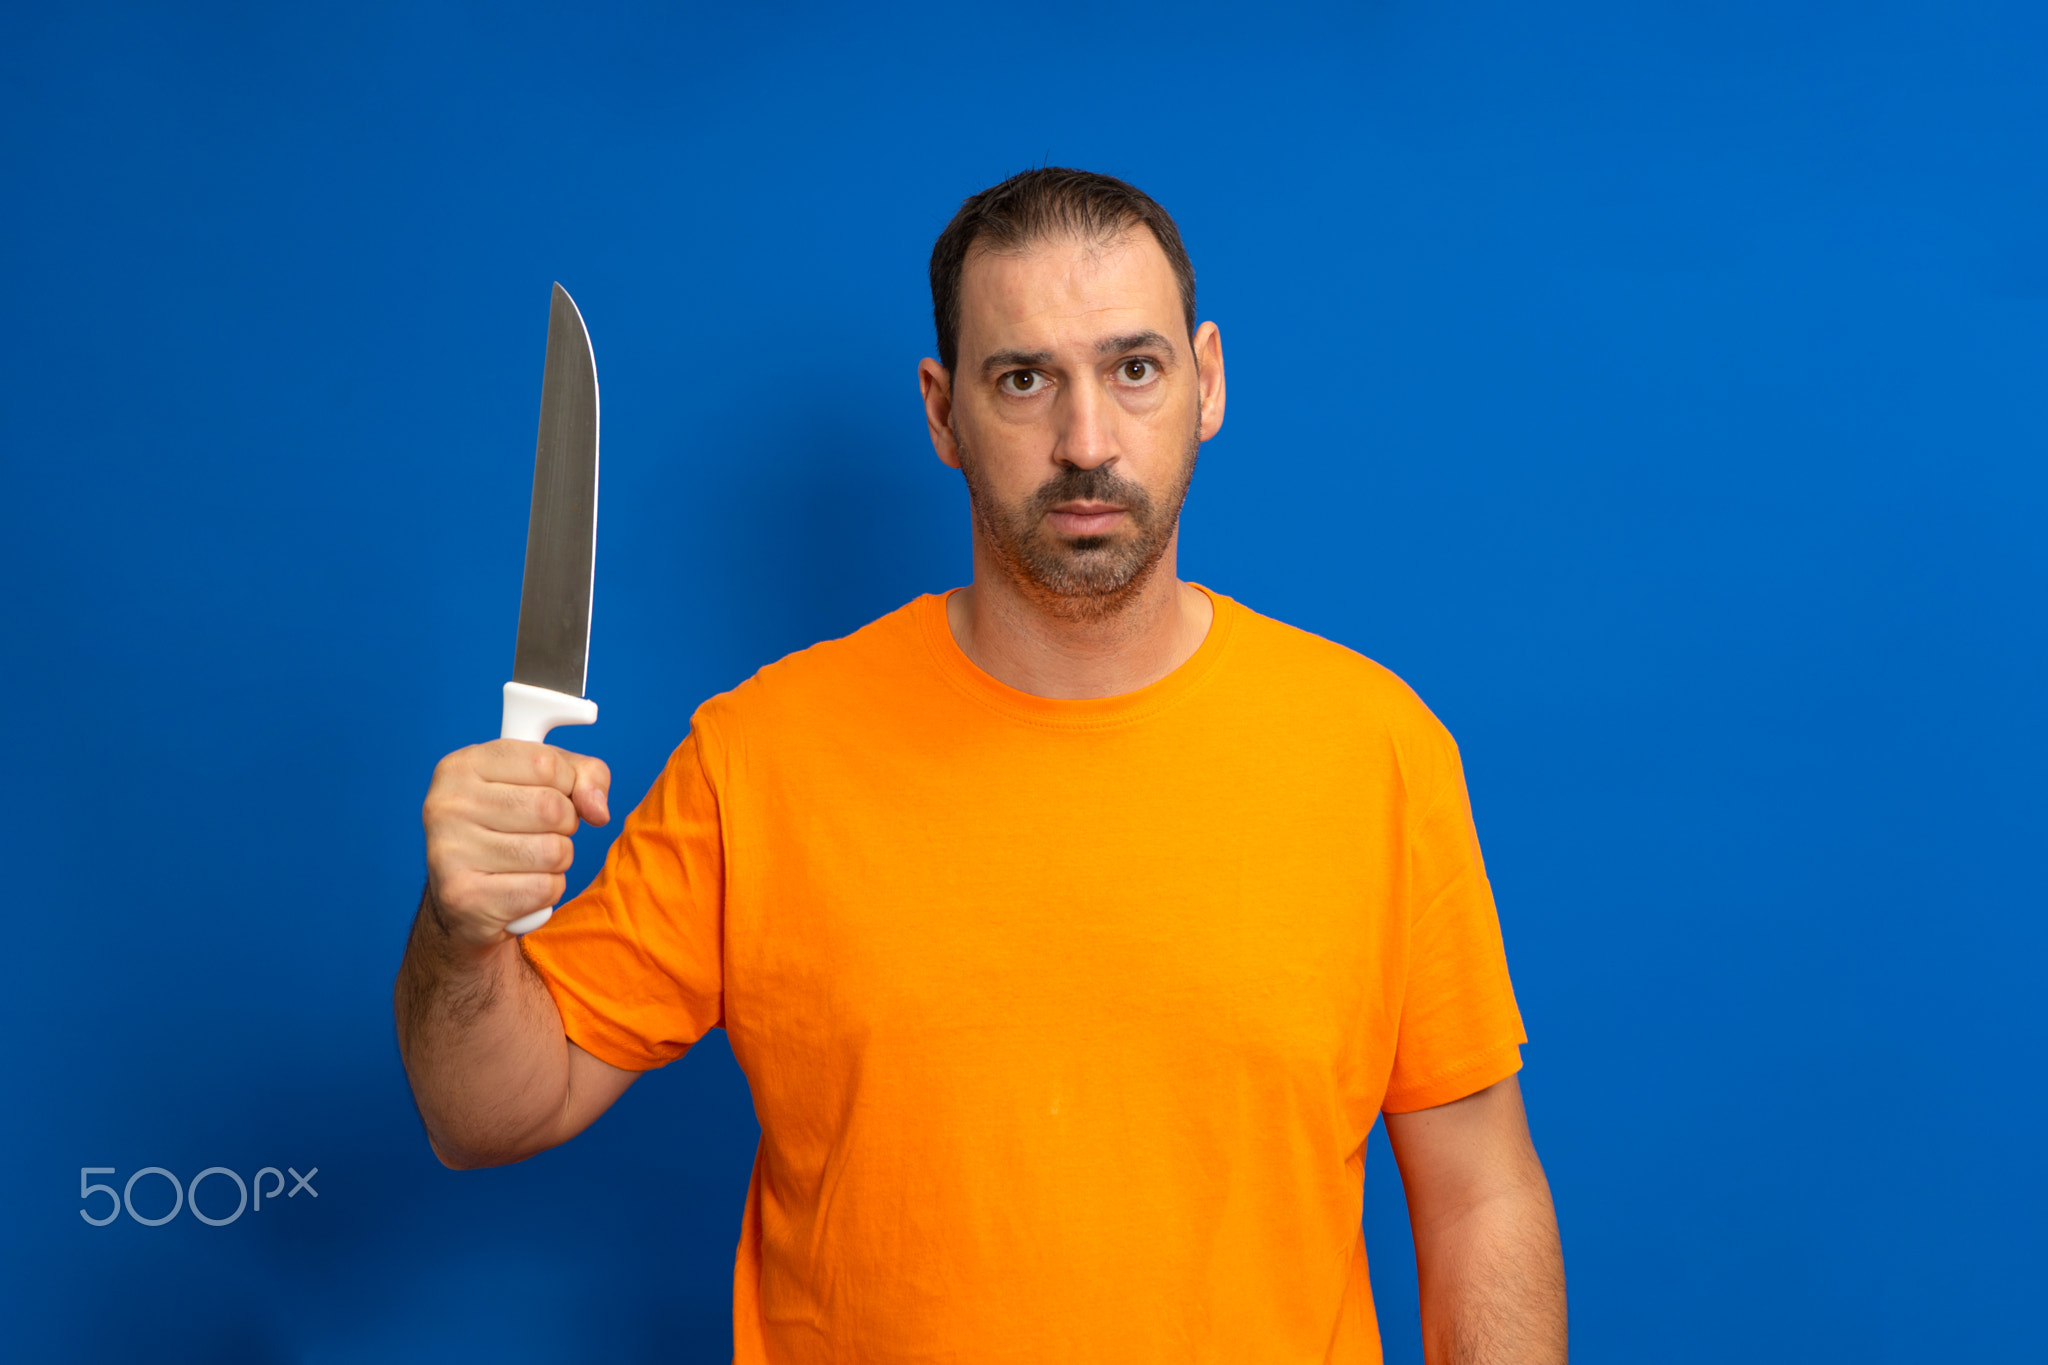 Caucasian man with beard holding kitchen knife with threatening and